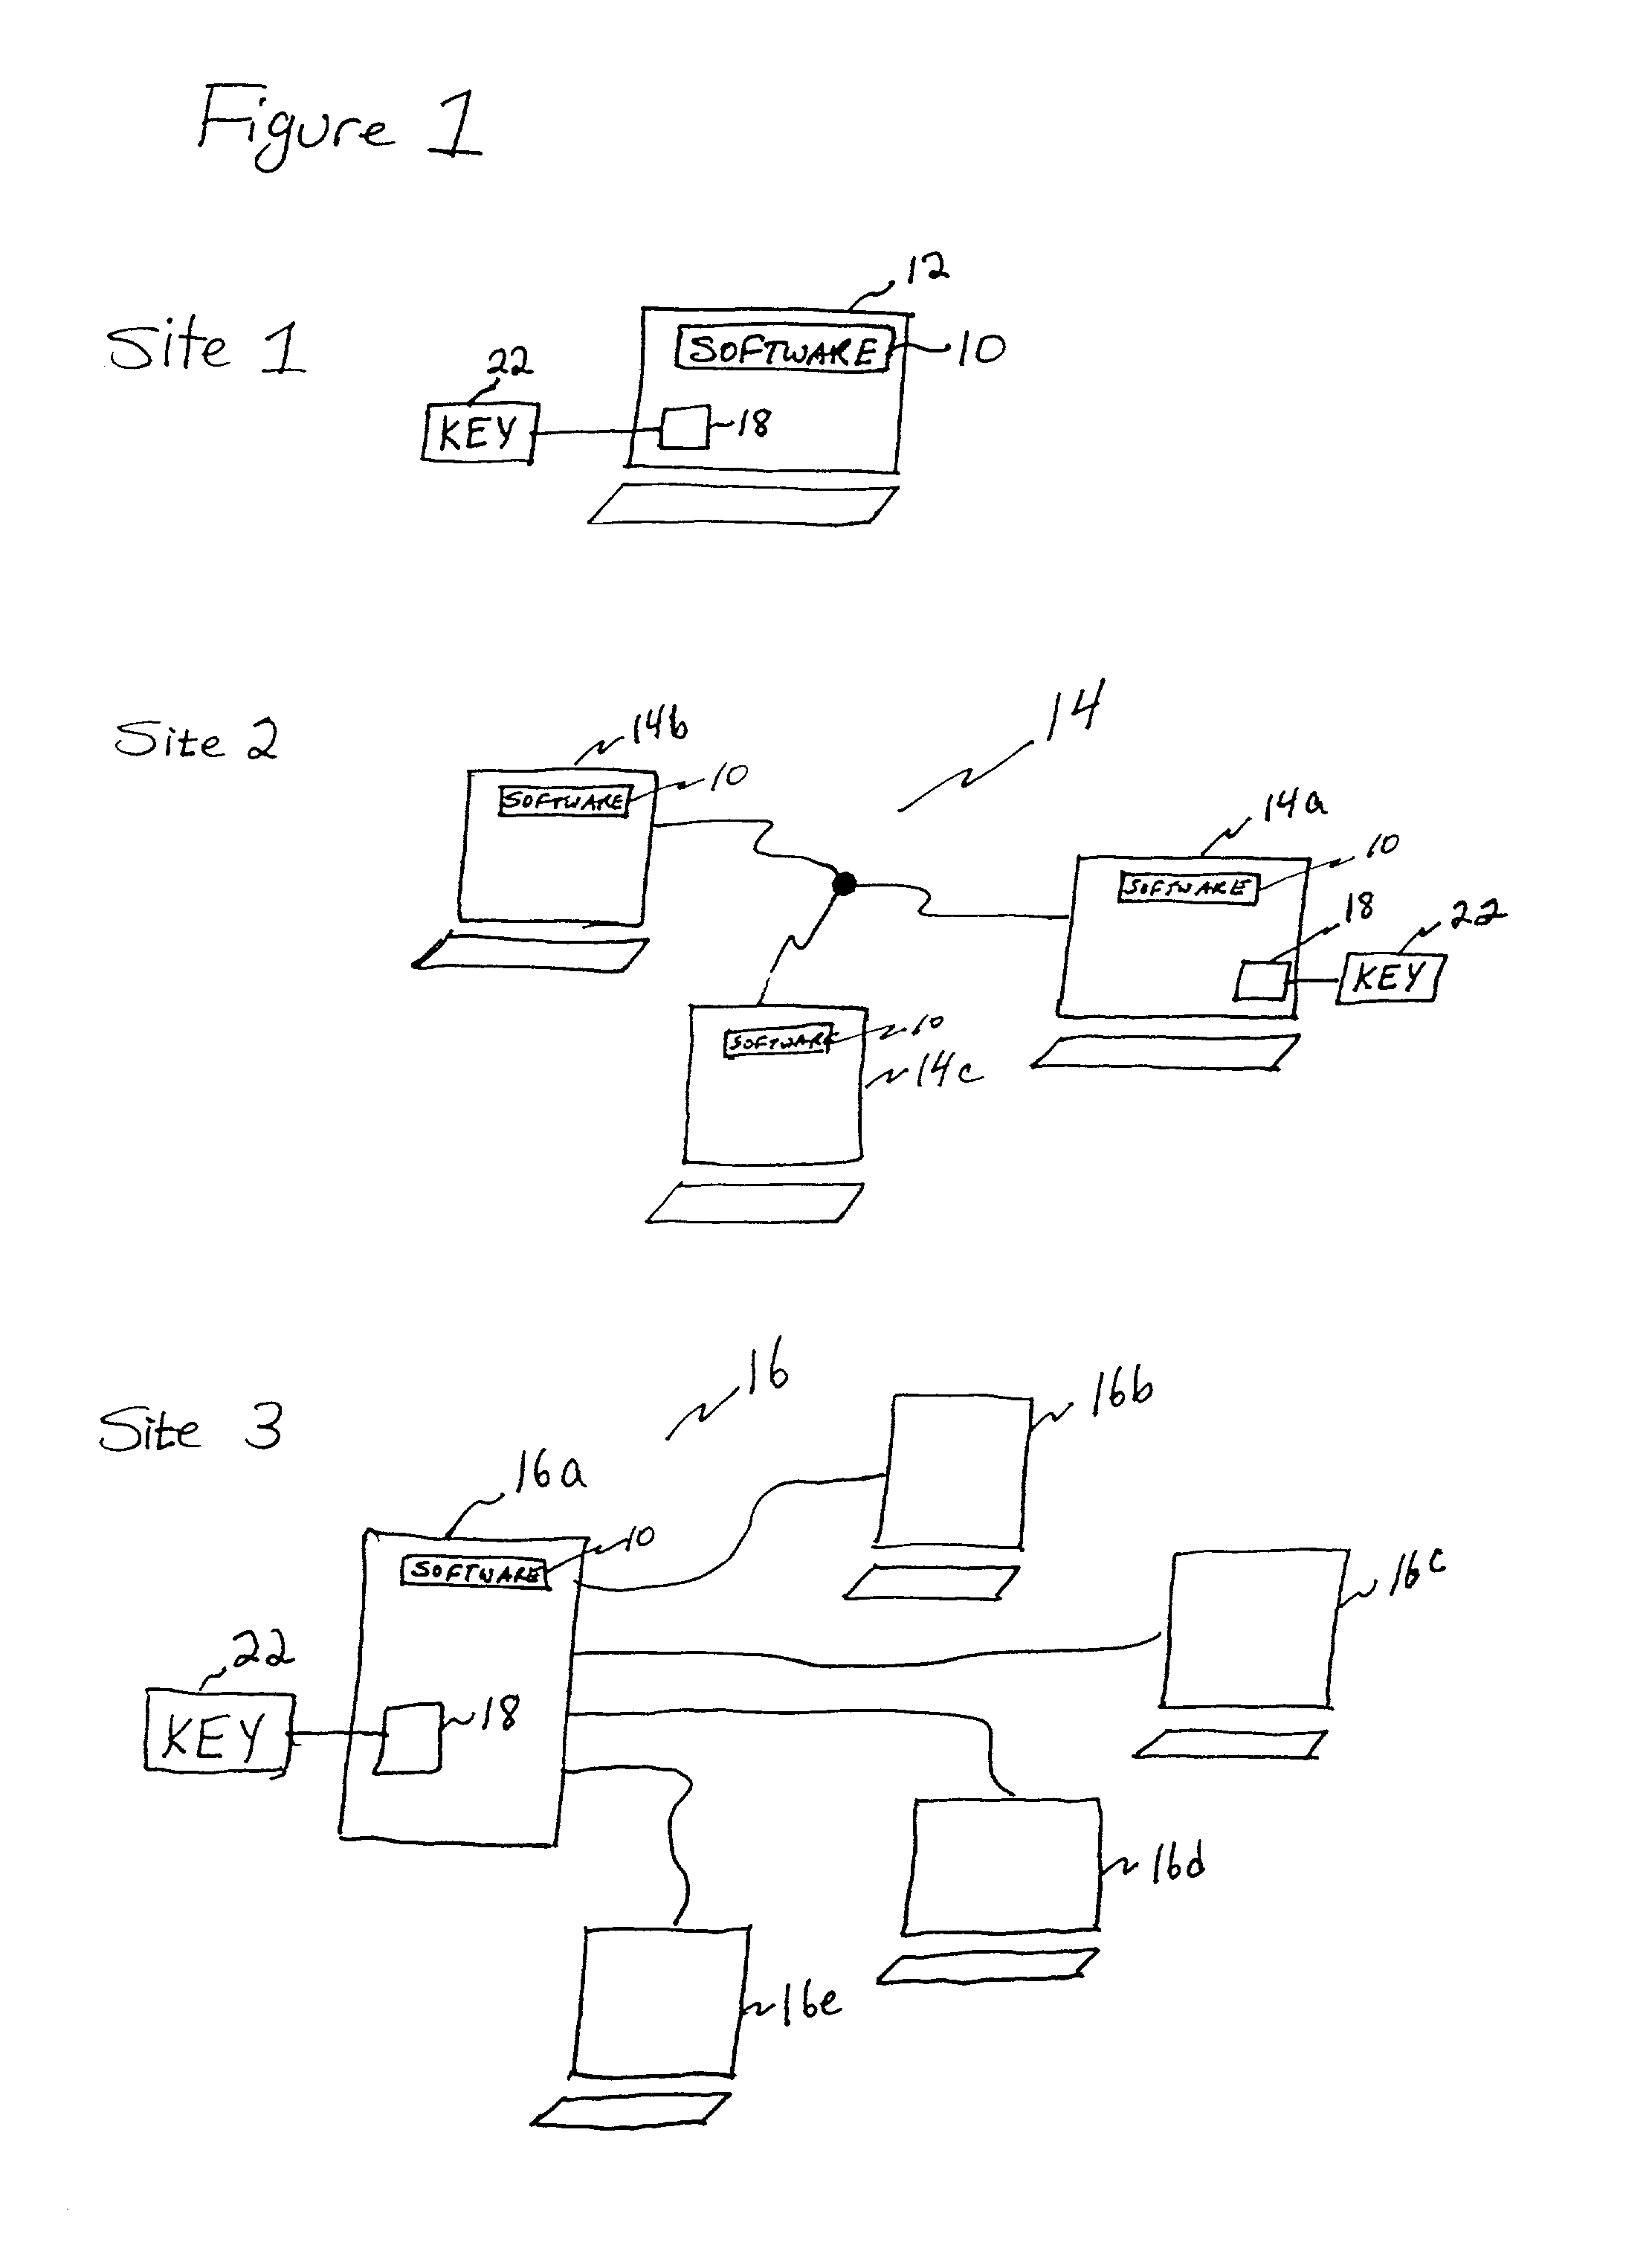 Method and system for tracking software licenses and usage